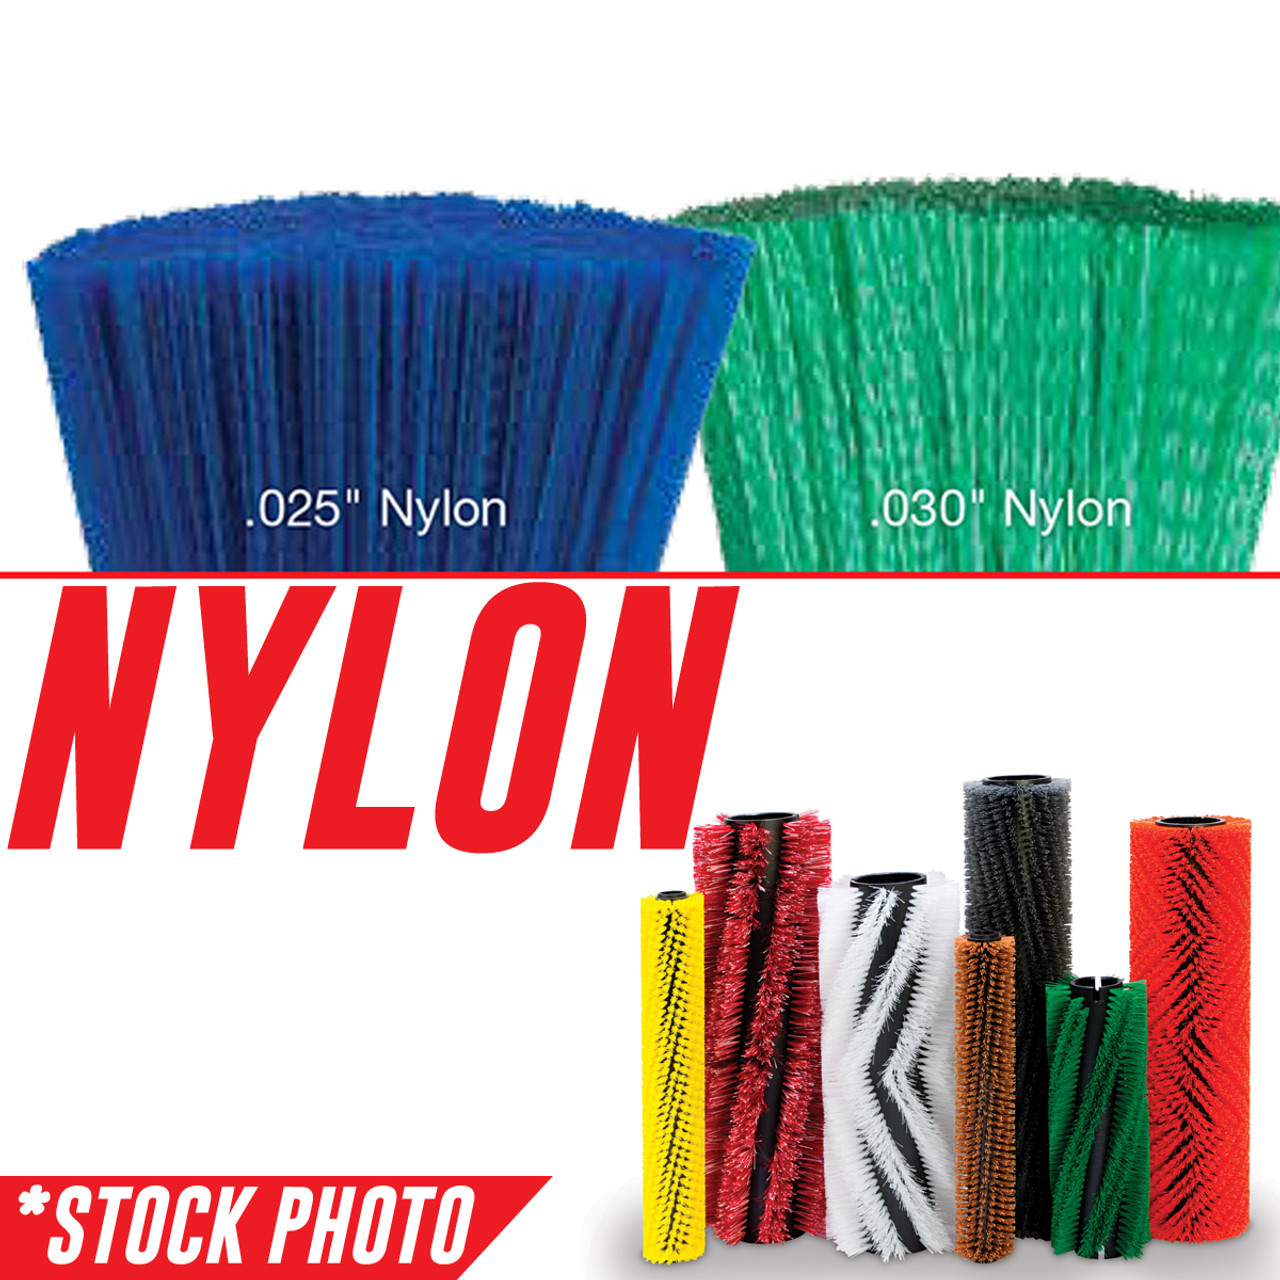 3300314: 36" Cylindrical Brush 8 Double Row Nylon fits PowerBoss Models 52, 62, 65, 71, 75, 78, SW/6X